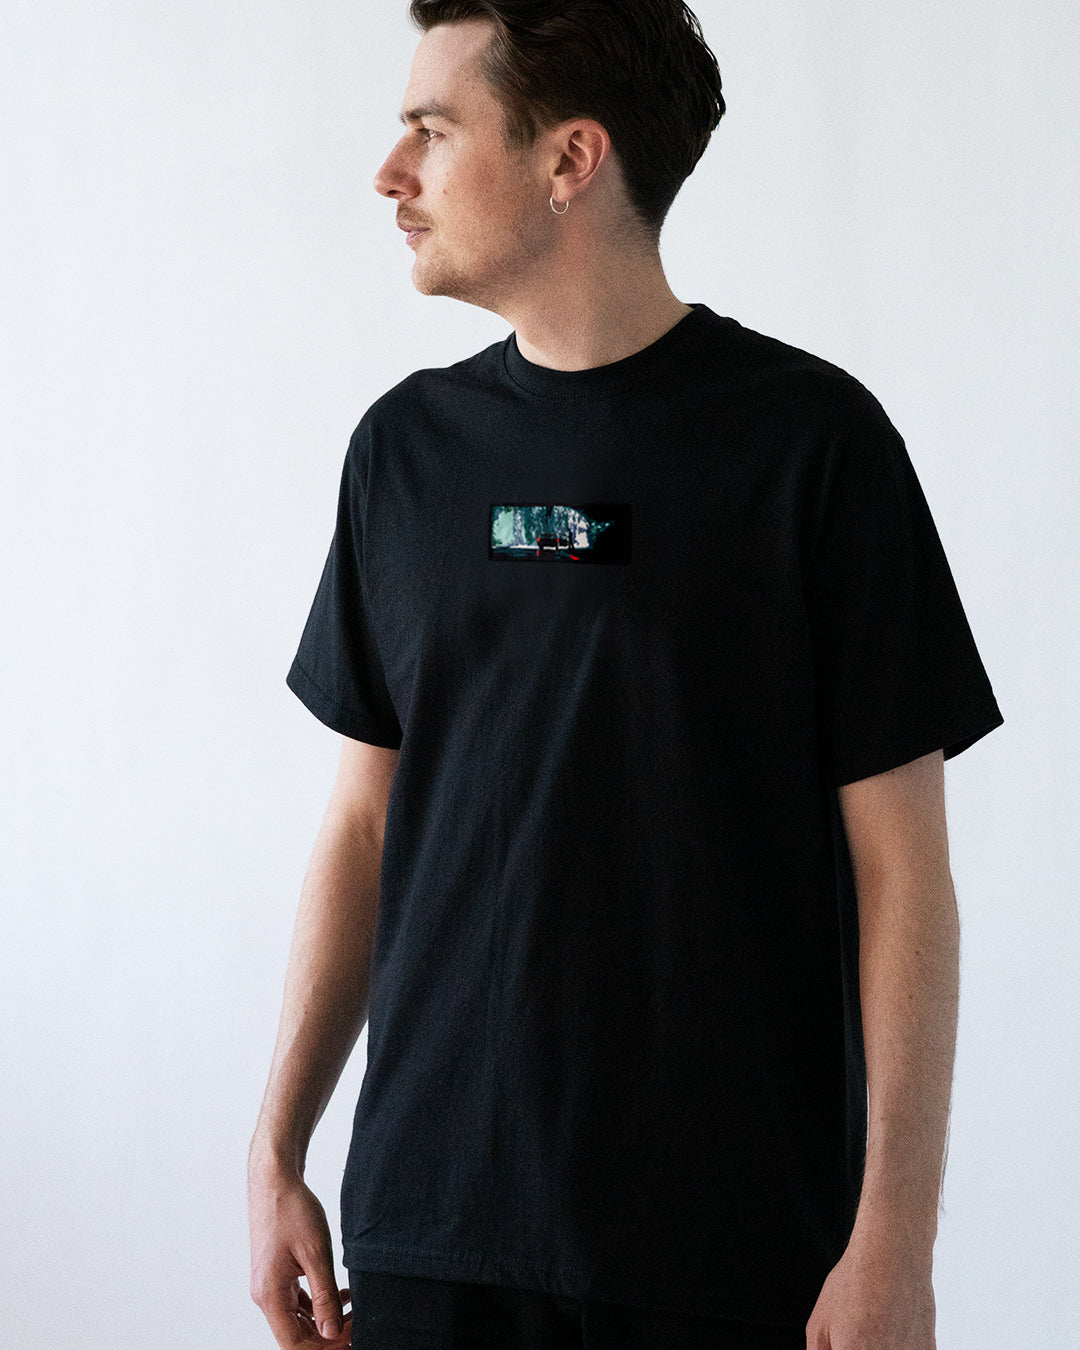 A/W23 Embroidered 'Under The Bridge In The Rain' T-Shirt {black}